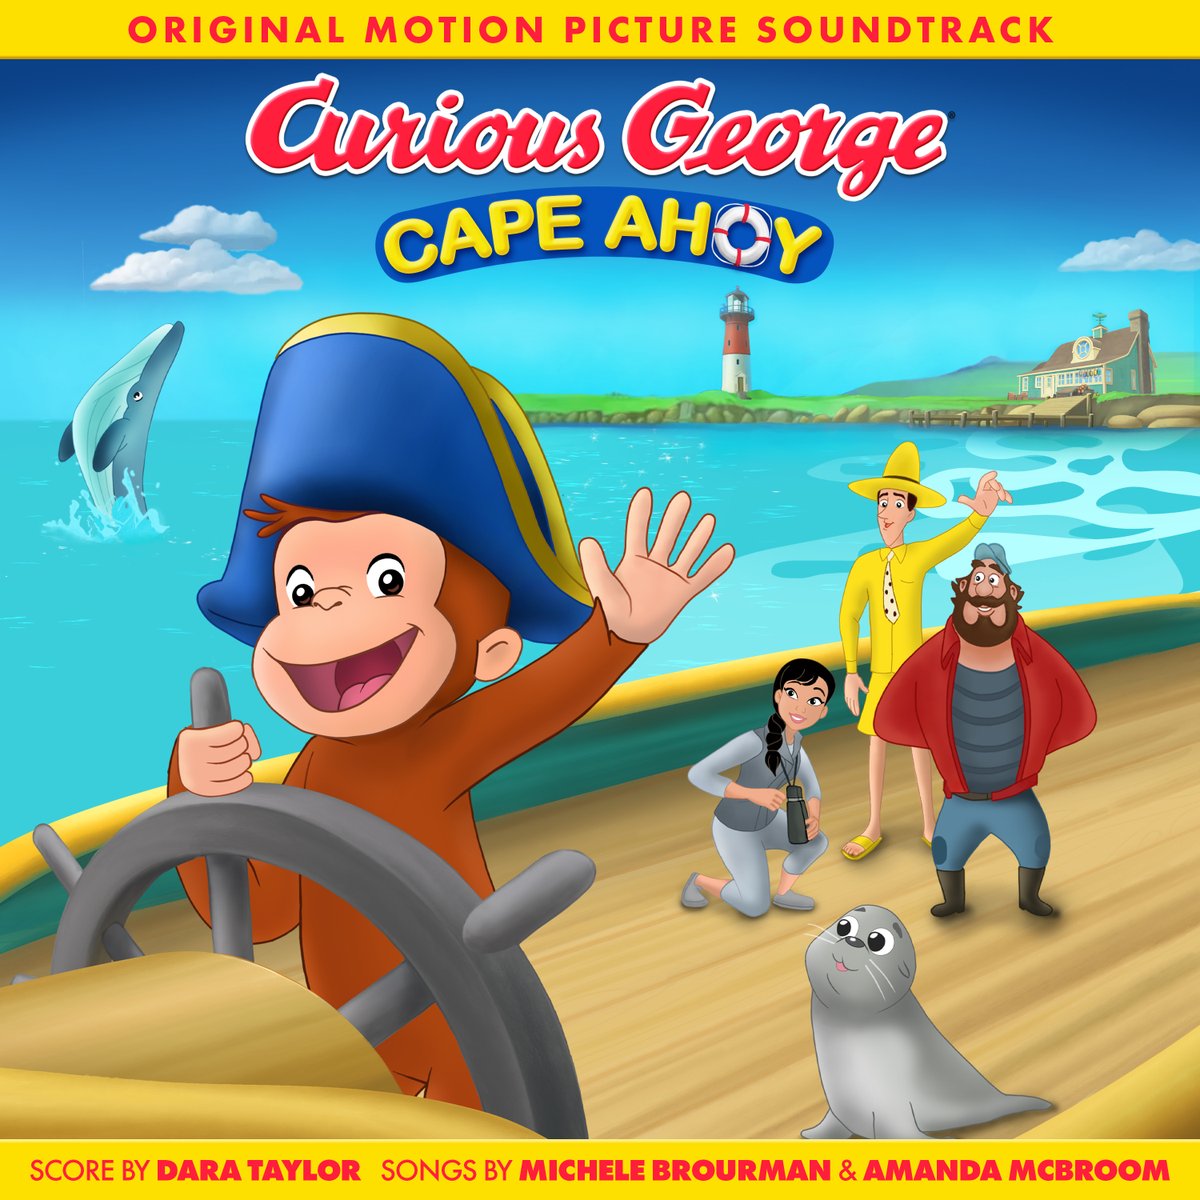 The soundtrack to #CuriousGeorgeCapeAhoy is out now, featuring songs by franchise songwriters @MicheleBrourman & @AmandaMcBroom1 and score by composer @DaraTaylorMusic!
backlotmusic.ffm.to/curiousgeorge6